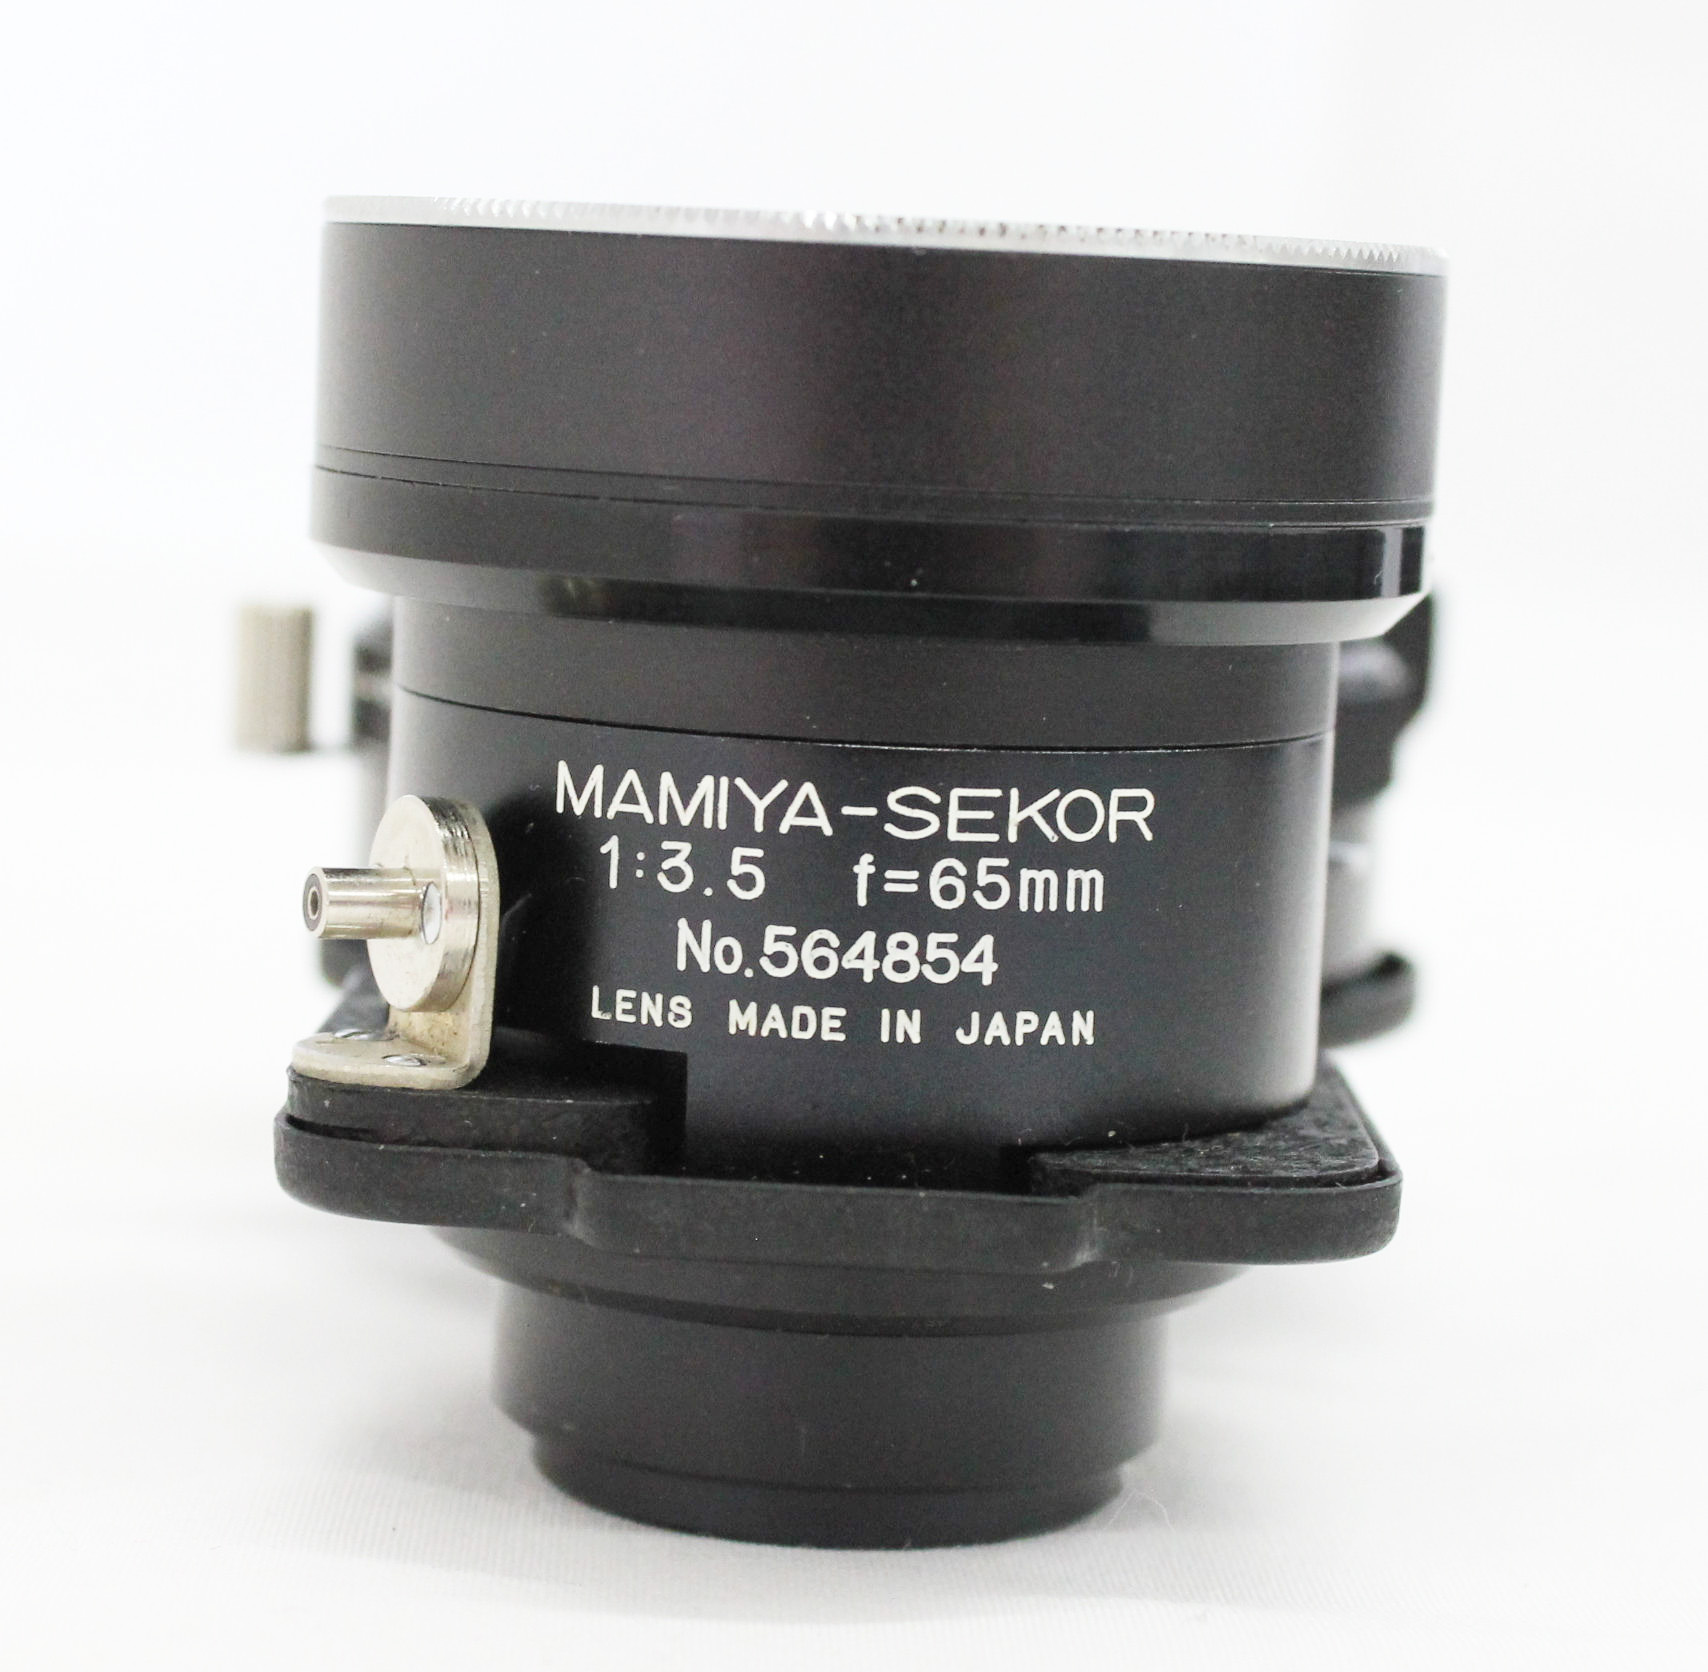  Mamiya Sekor 65mm F/3.5 Blue Dot TLR Lens for C3 C33 C220 C330 from Japan Photo 4